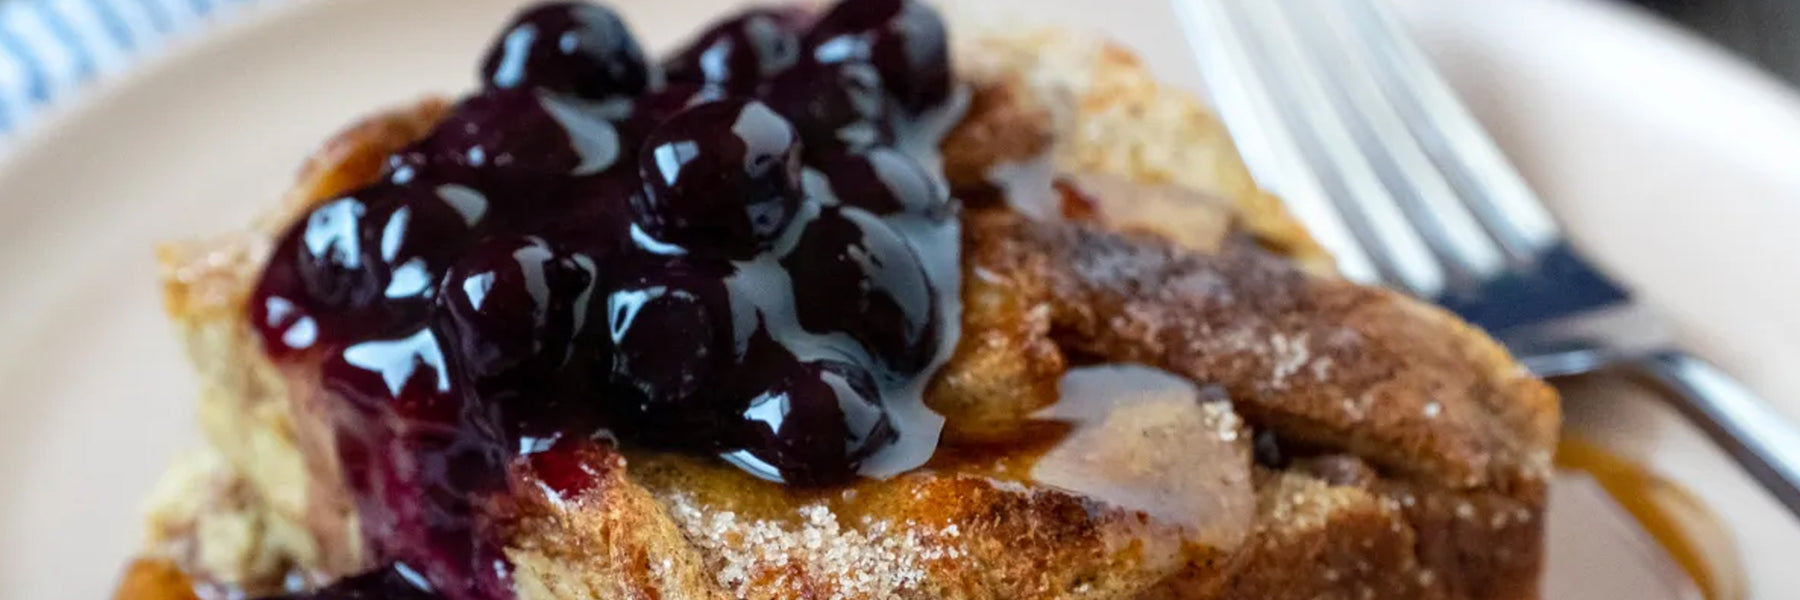 Cinnamon Blueberry French Toast